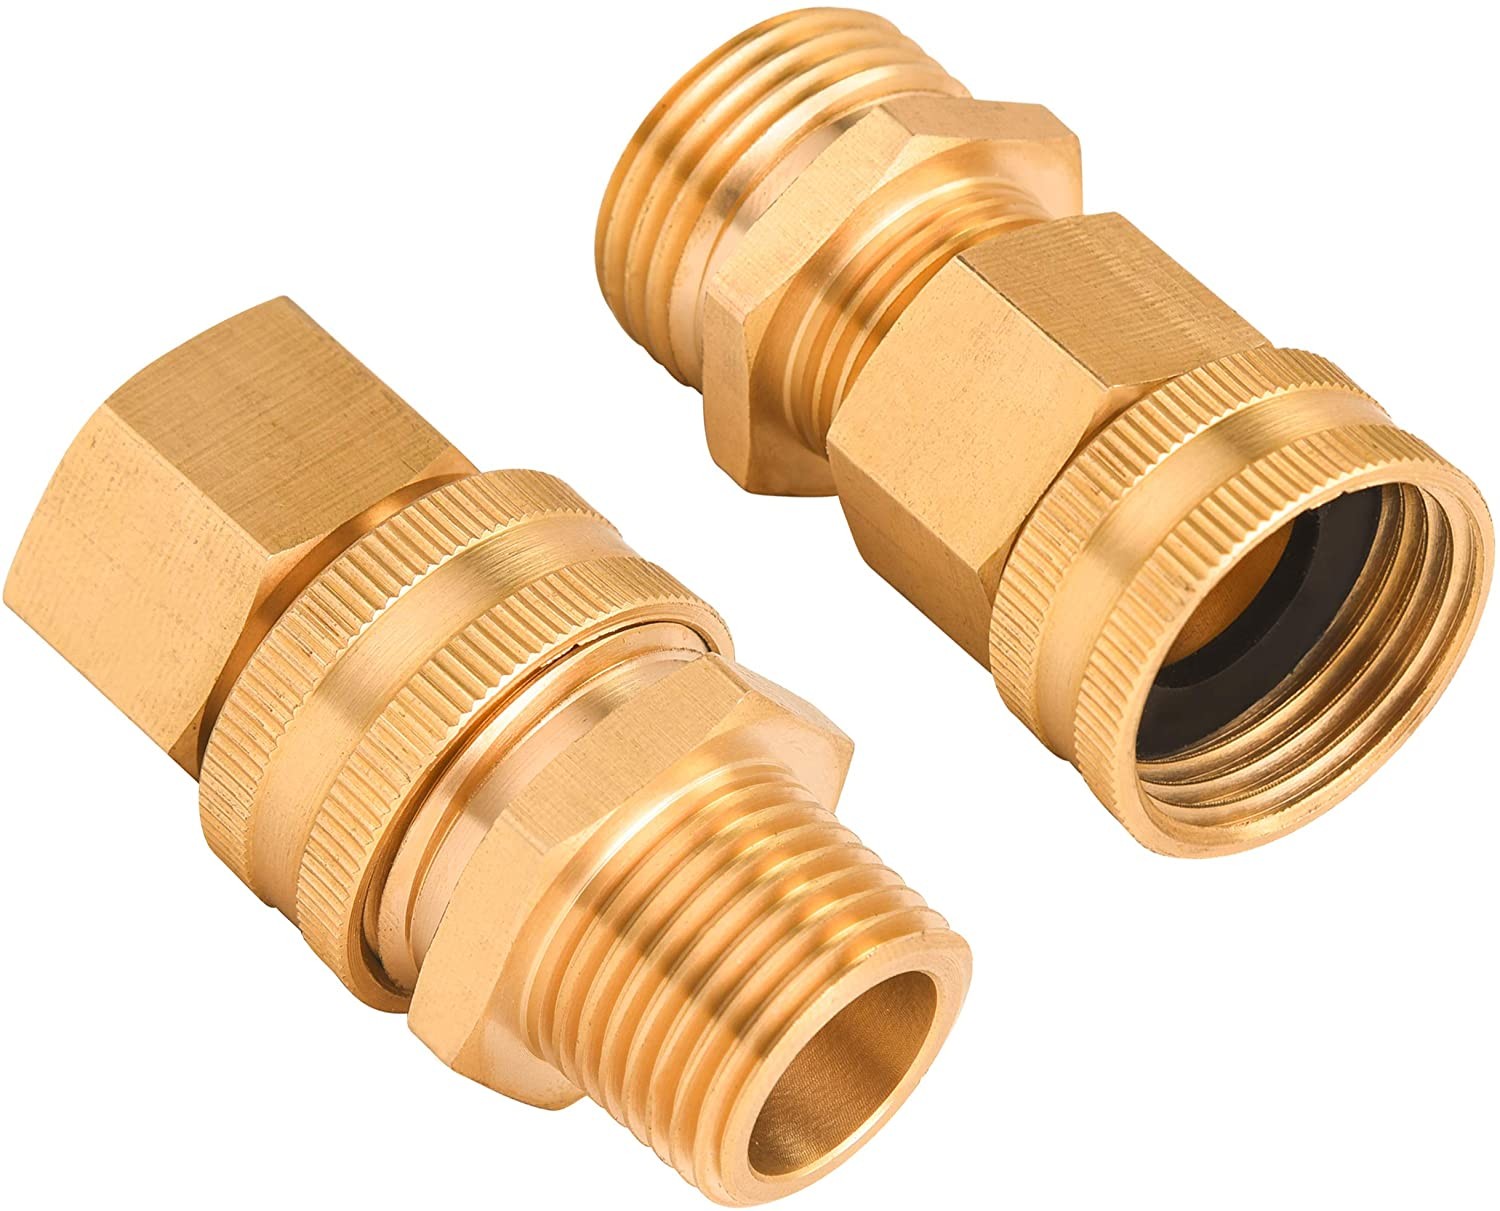  Garden Hose Adapter, 3/4 Inch GHT to 1/2 Inch NPT, Double Male and Female Brass Connector